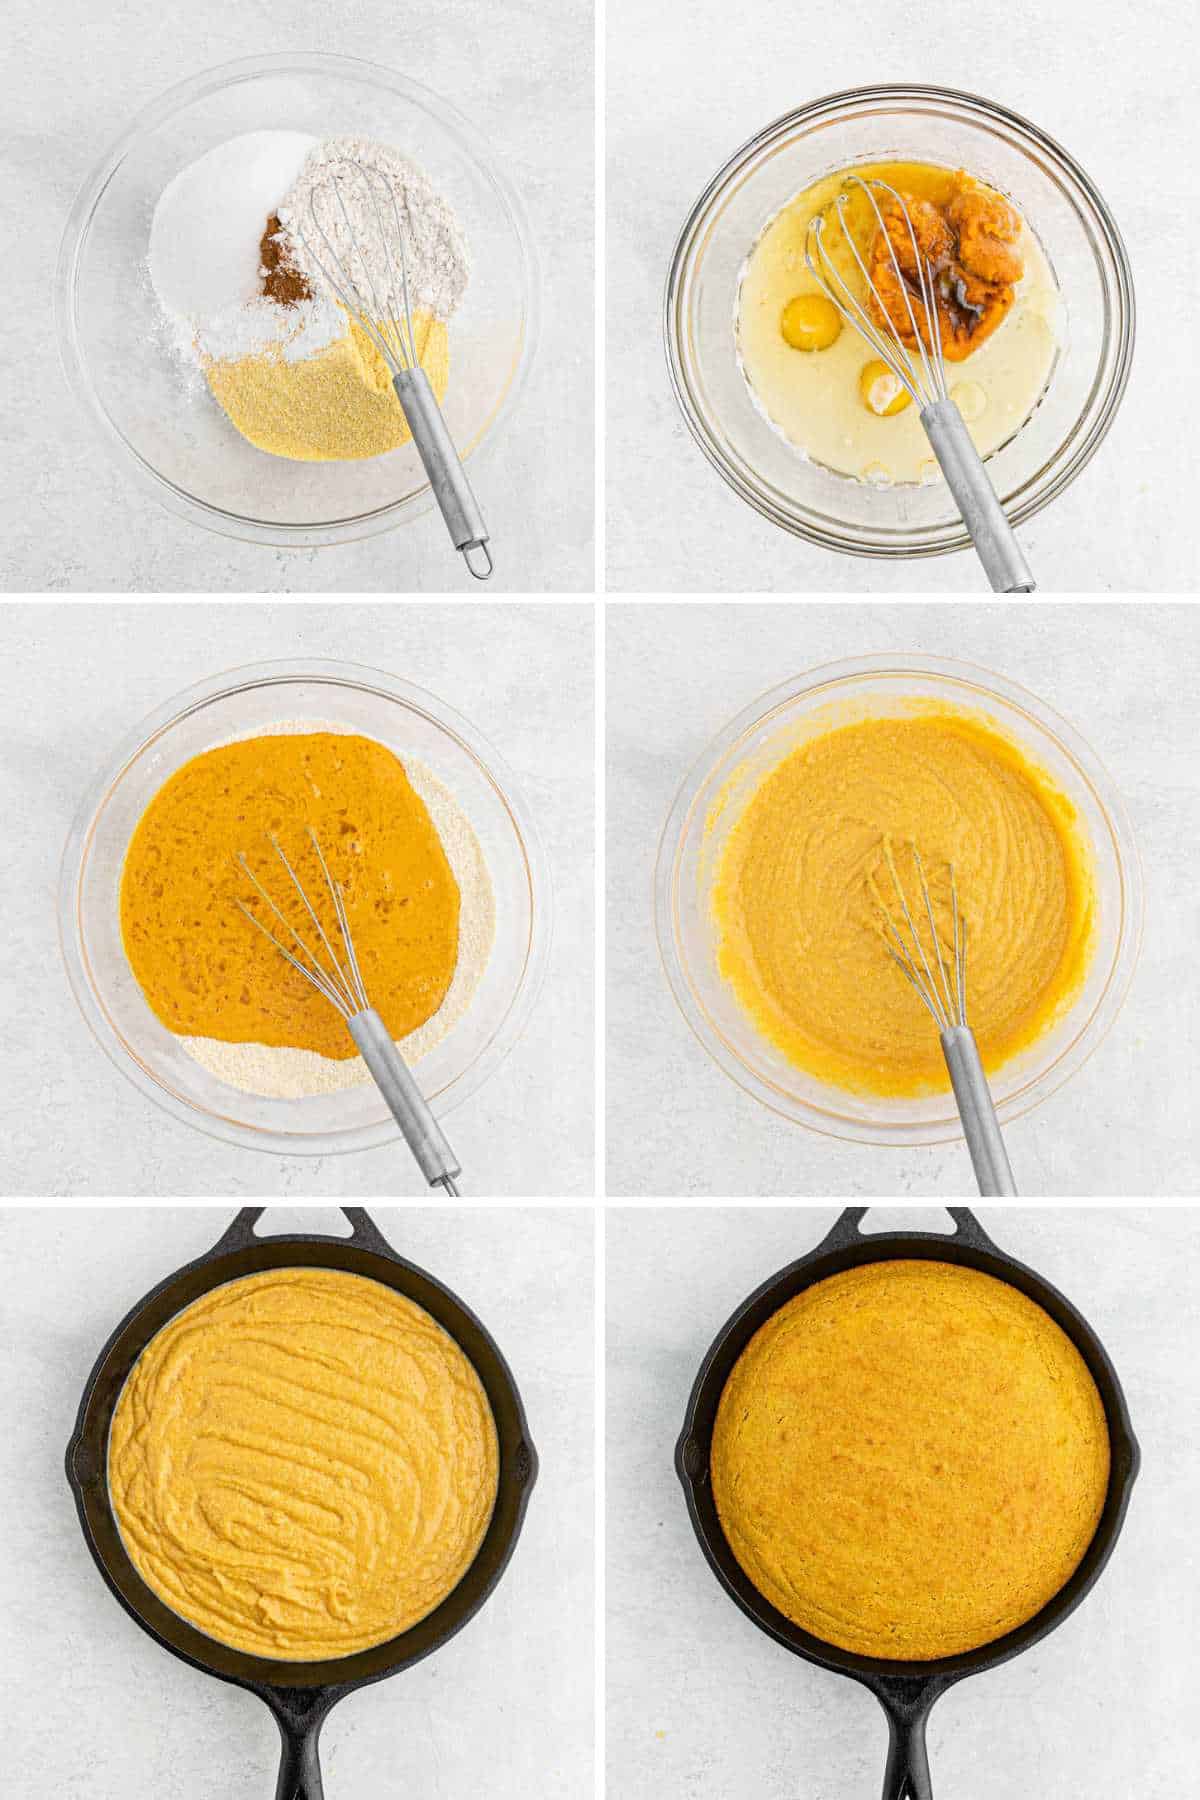 A collage of images from making the pumpkin cornbread batter to baking it in a skillet.